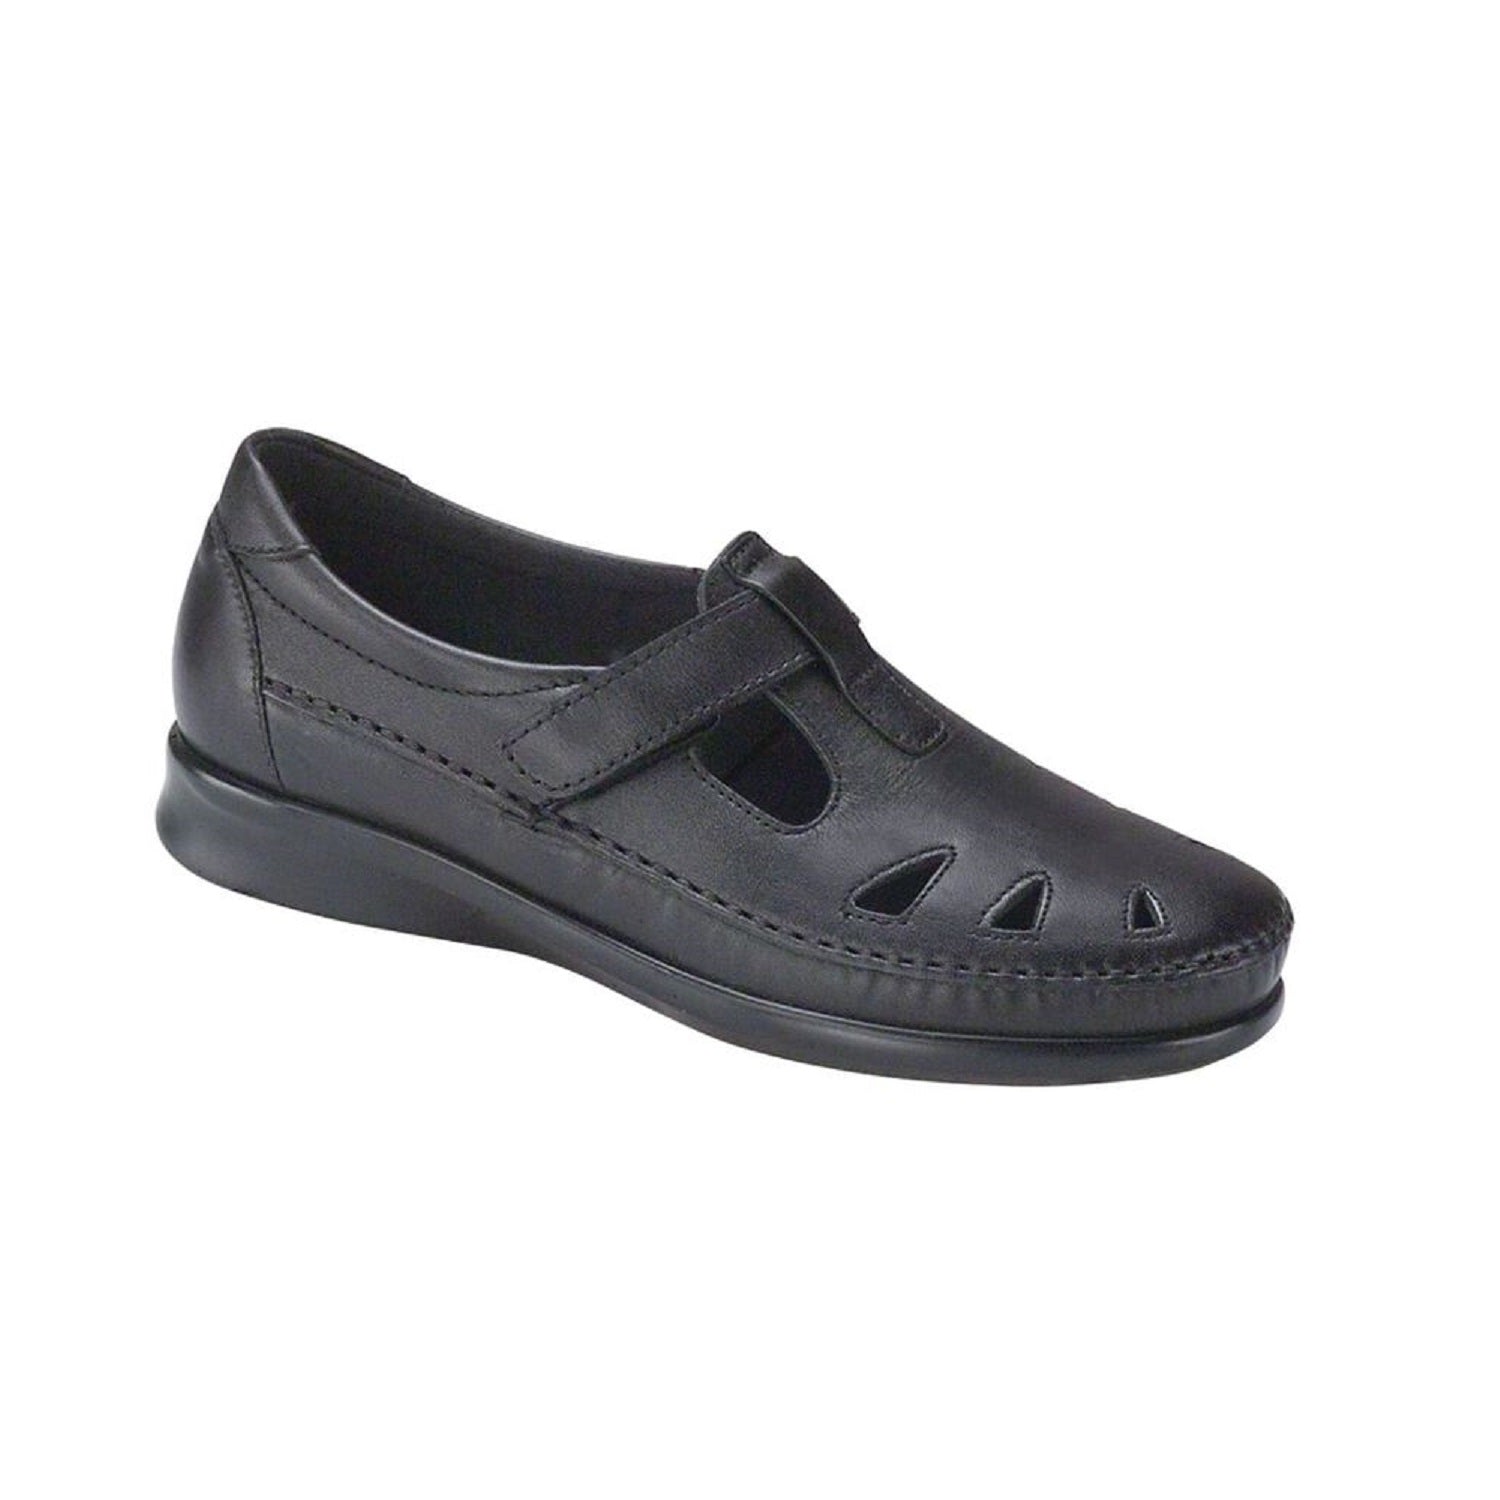 Black loafer with cut out design and velcro strap.